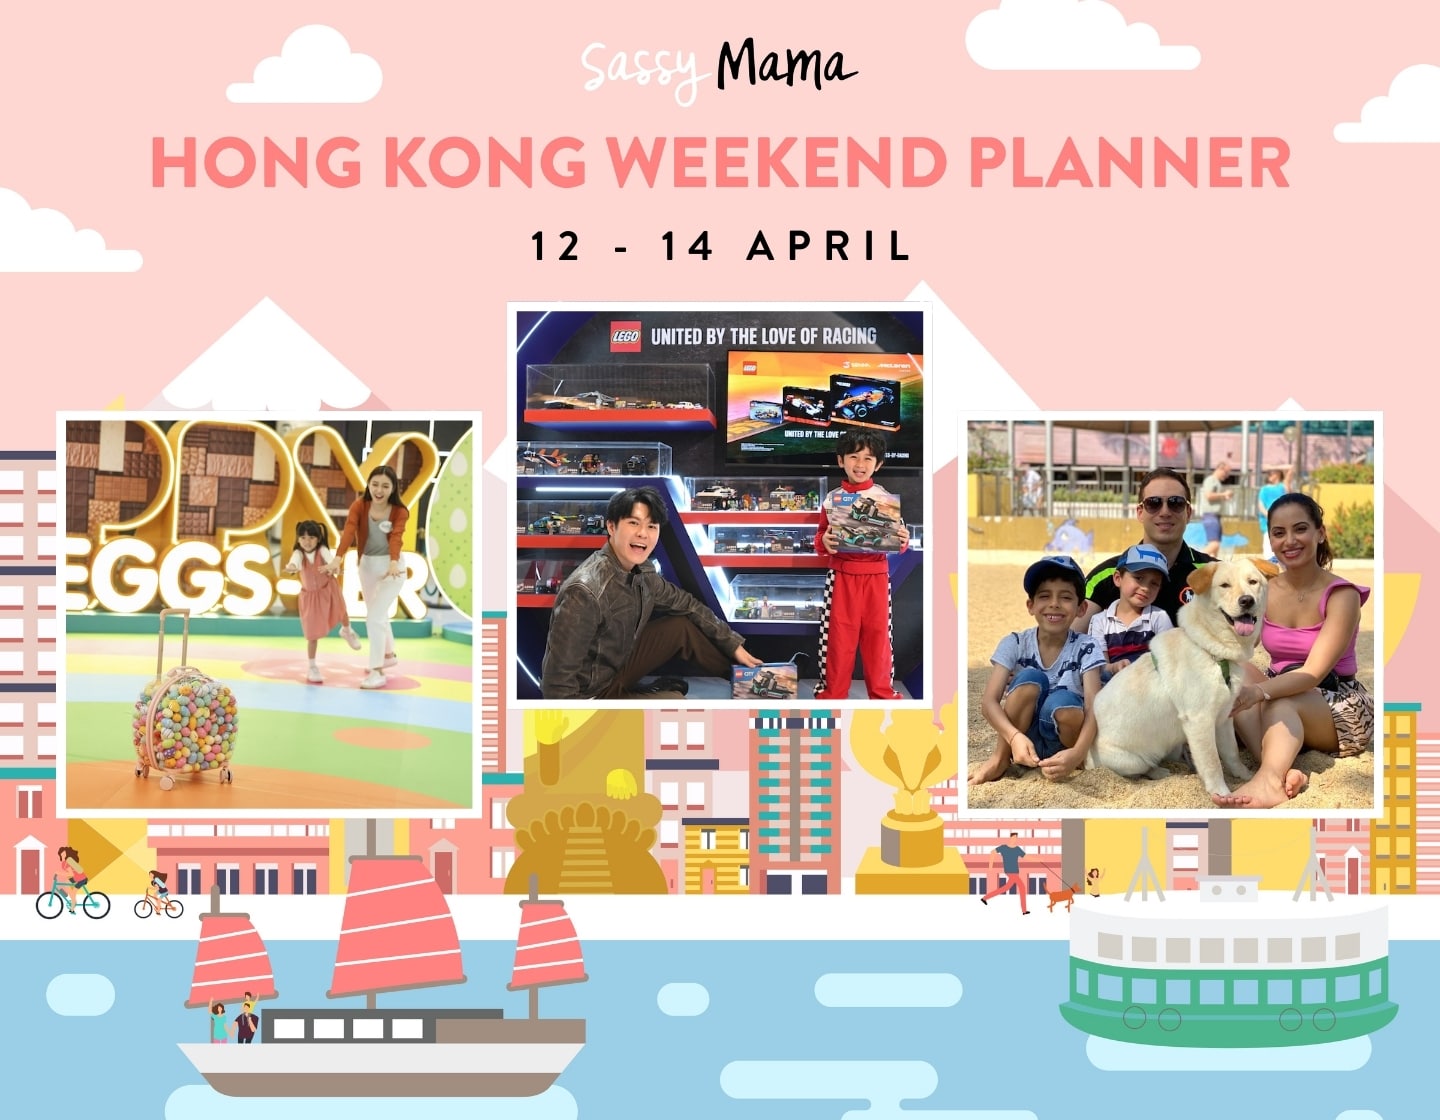 weekend planner for kids and families in hk